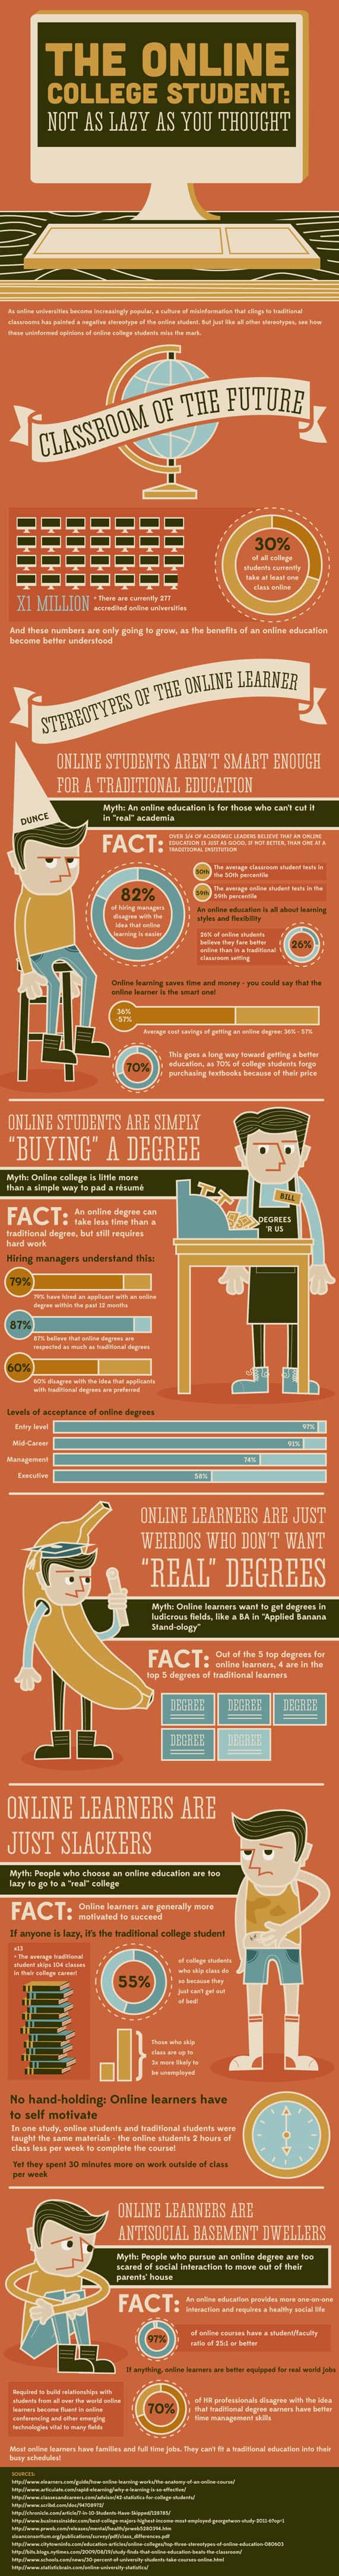 Online College Courses Infographic